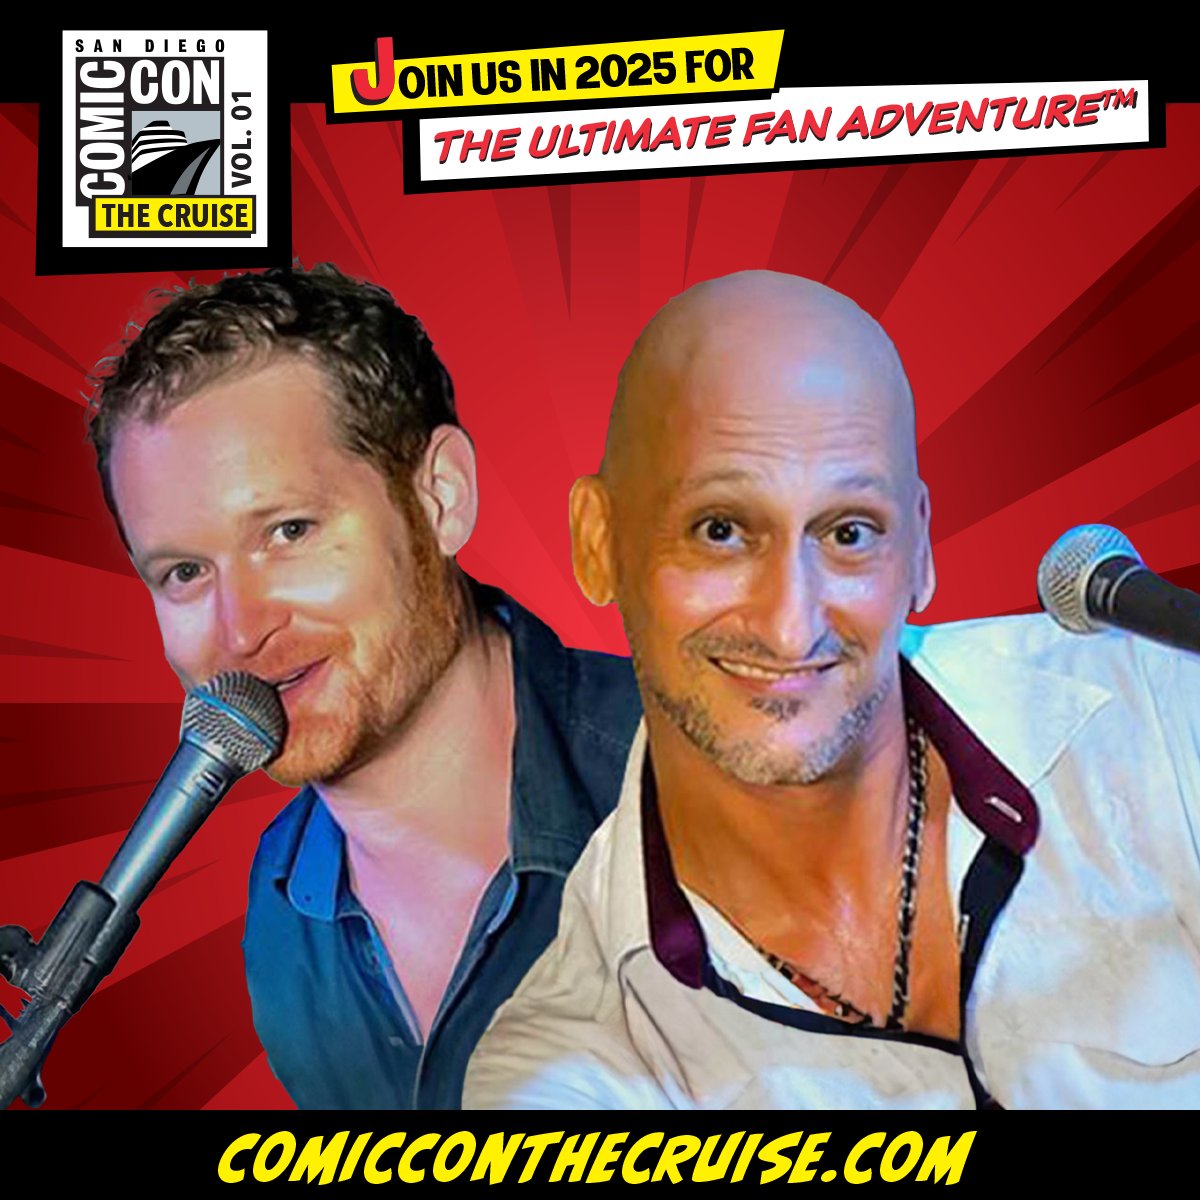 The Action Figures, featuring Scott Grimes and Greg Grunberg, will be making their cruise debut on The Ultimate Fan Adventure™ in 2025! Also joining the inaugural voyage, #brianwilk and #bradheron, dueling piano players!
@comicconband @greggrunberg @ScottGrimes @Comic_Con